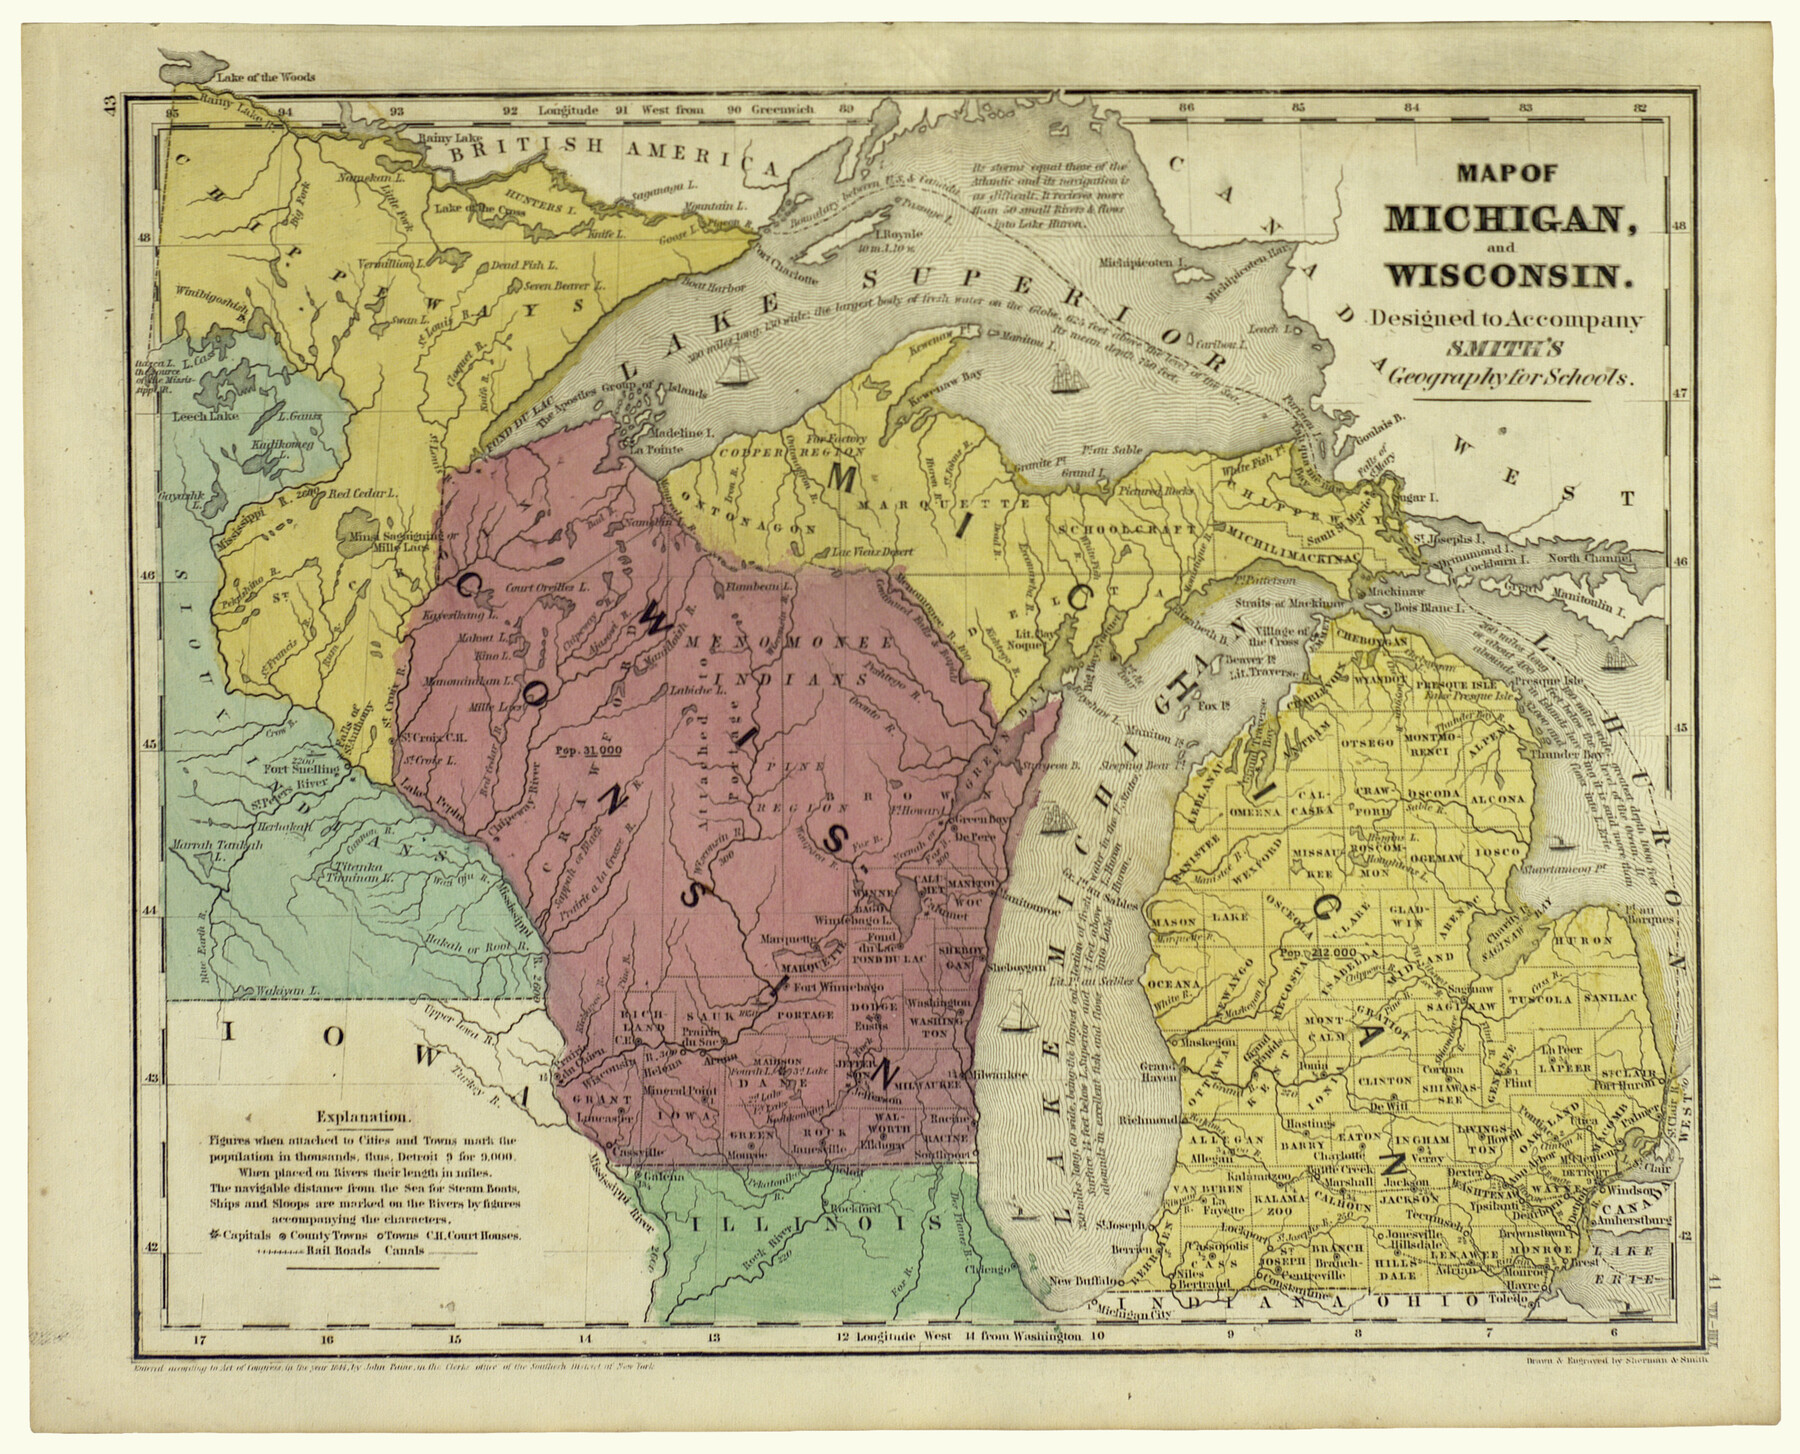 93890, Map of Michigan and Wisconsin designed to accompany Smith's Geography for Schools, Holcomb Digital Map Collection